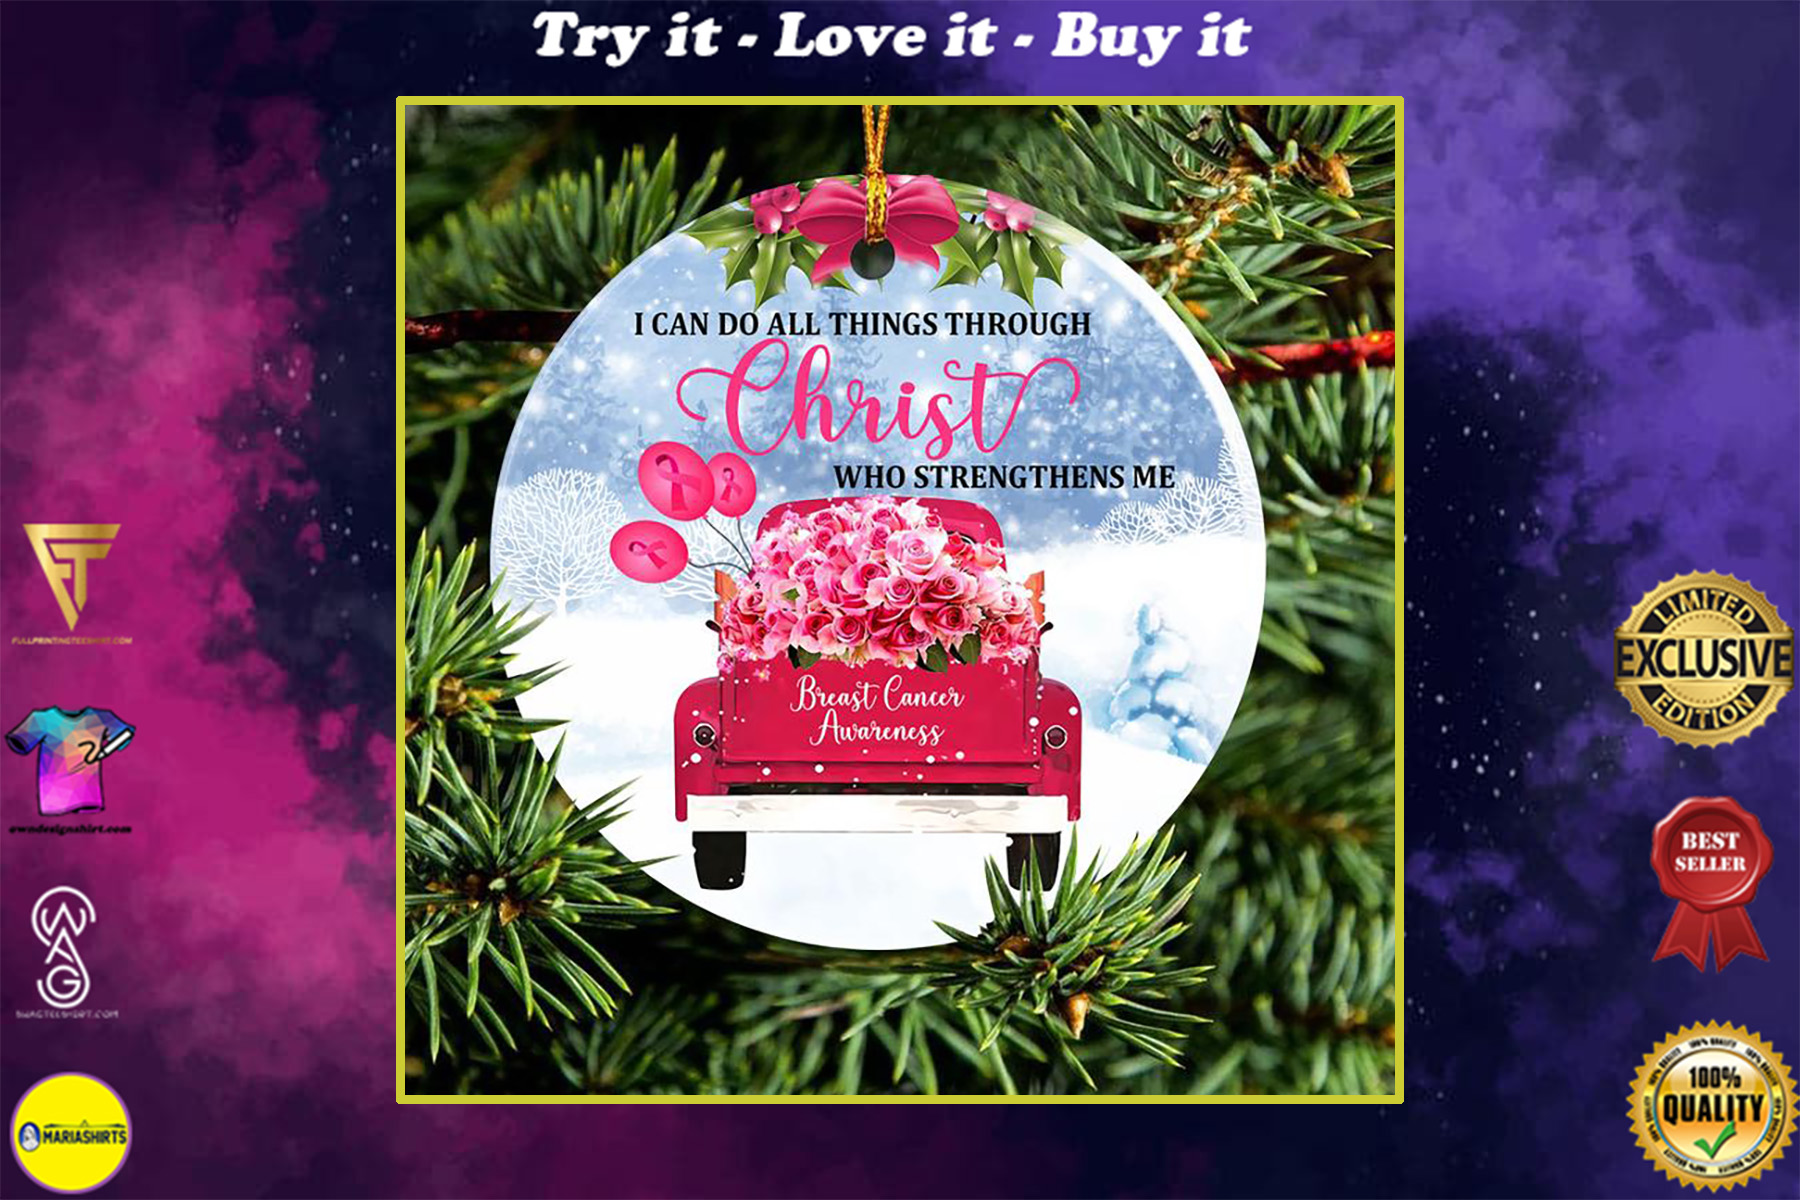 i can do all things through Christ who strengthens me breast cancer awareness ornament